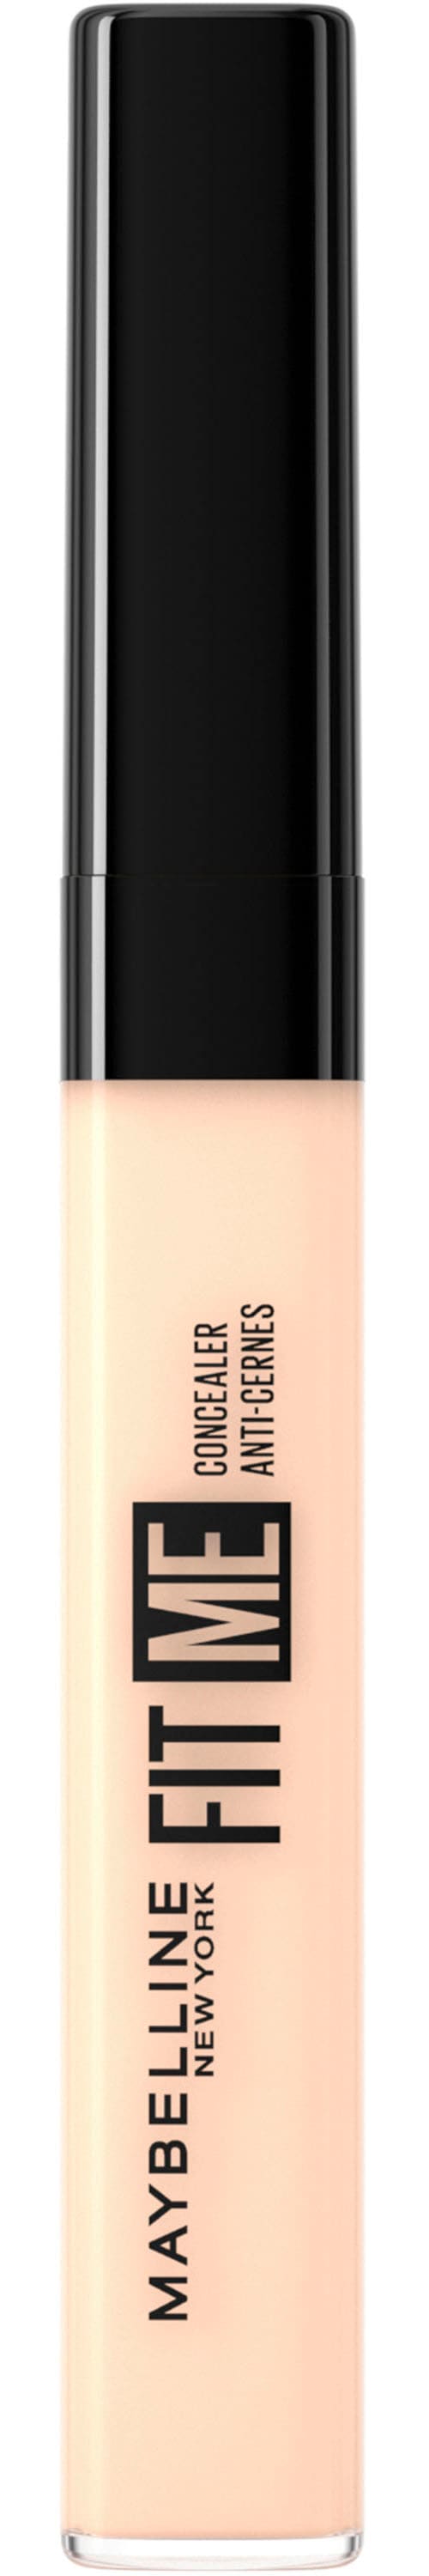 ♕ YORK MAYBELLINE Concealer »FIT bei NEW ME«